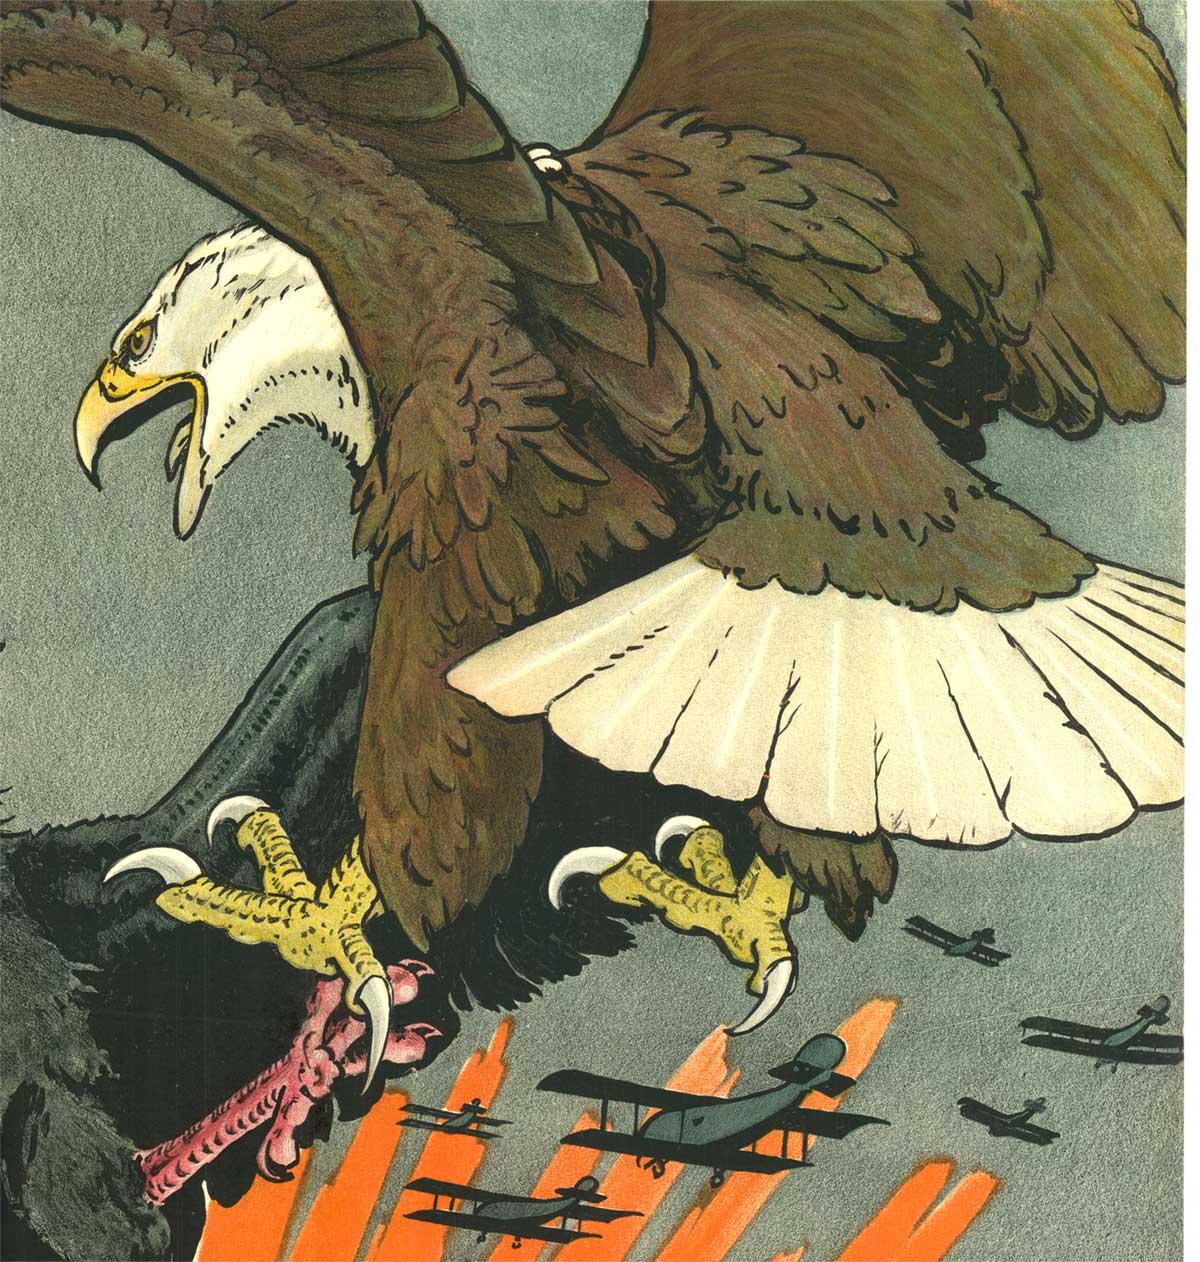 Original U. S military World War 1 poster:  Join the ARMY AIR SERVICE Be an American Eagle!   Consult your local draft board.   Read the illustrated booklet at any recruiting office, or write to the Chief Signal Officer of the Army, Washington D.